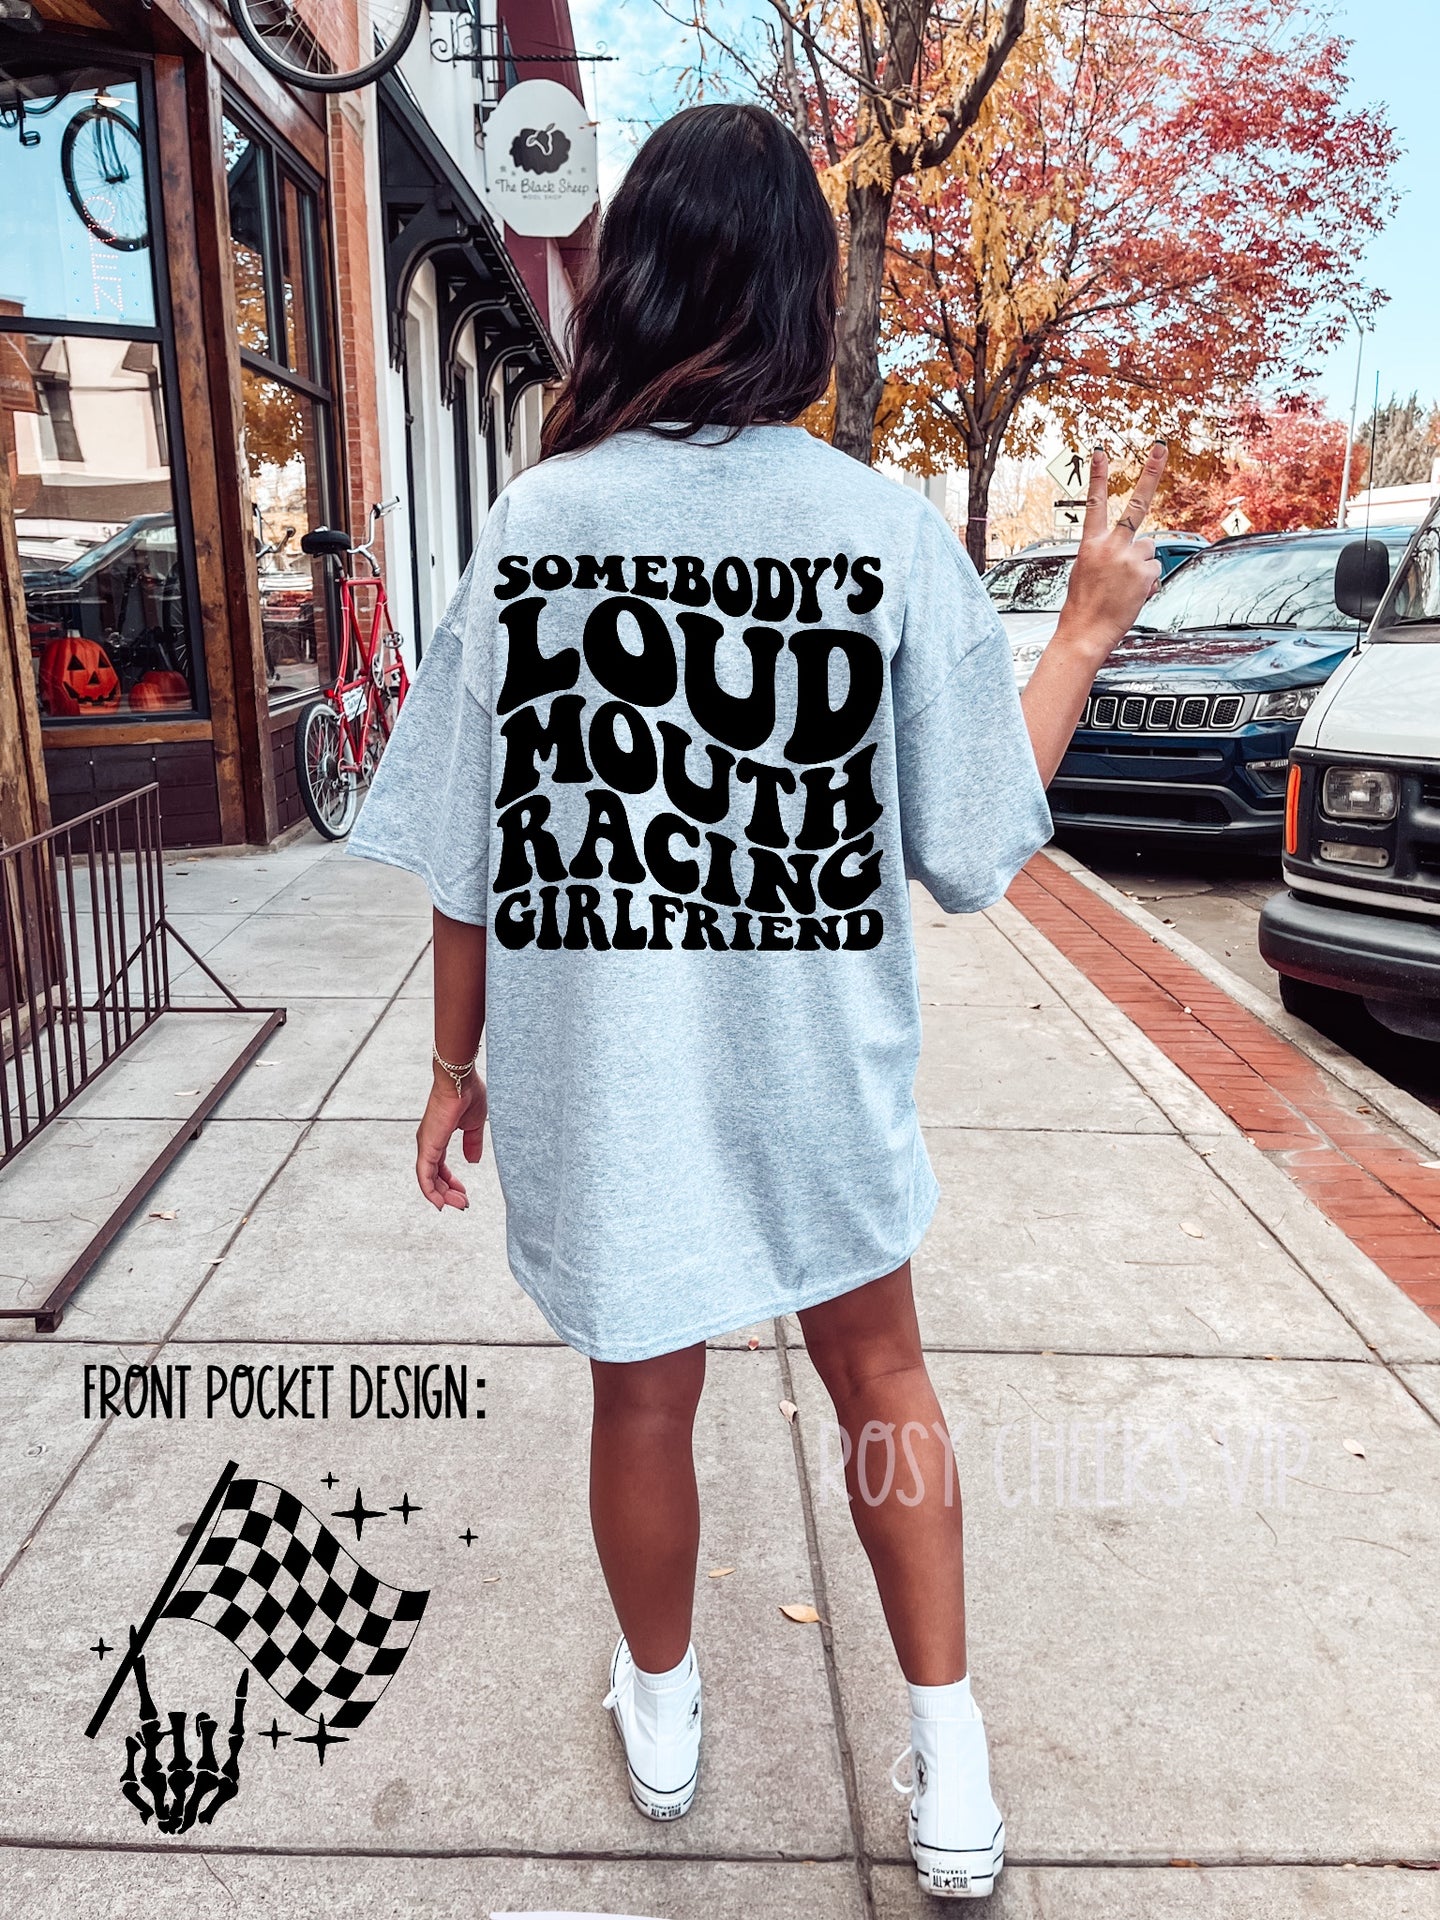 (PRE ORDER) loudmouth racing girlfriend